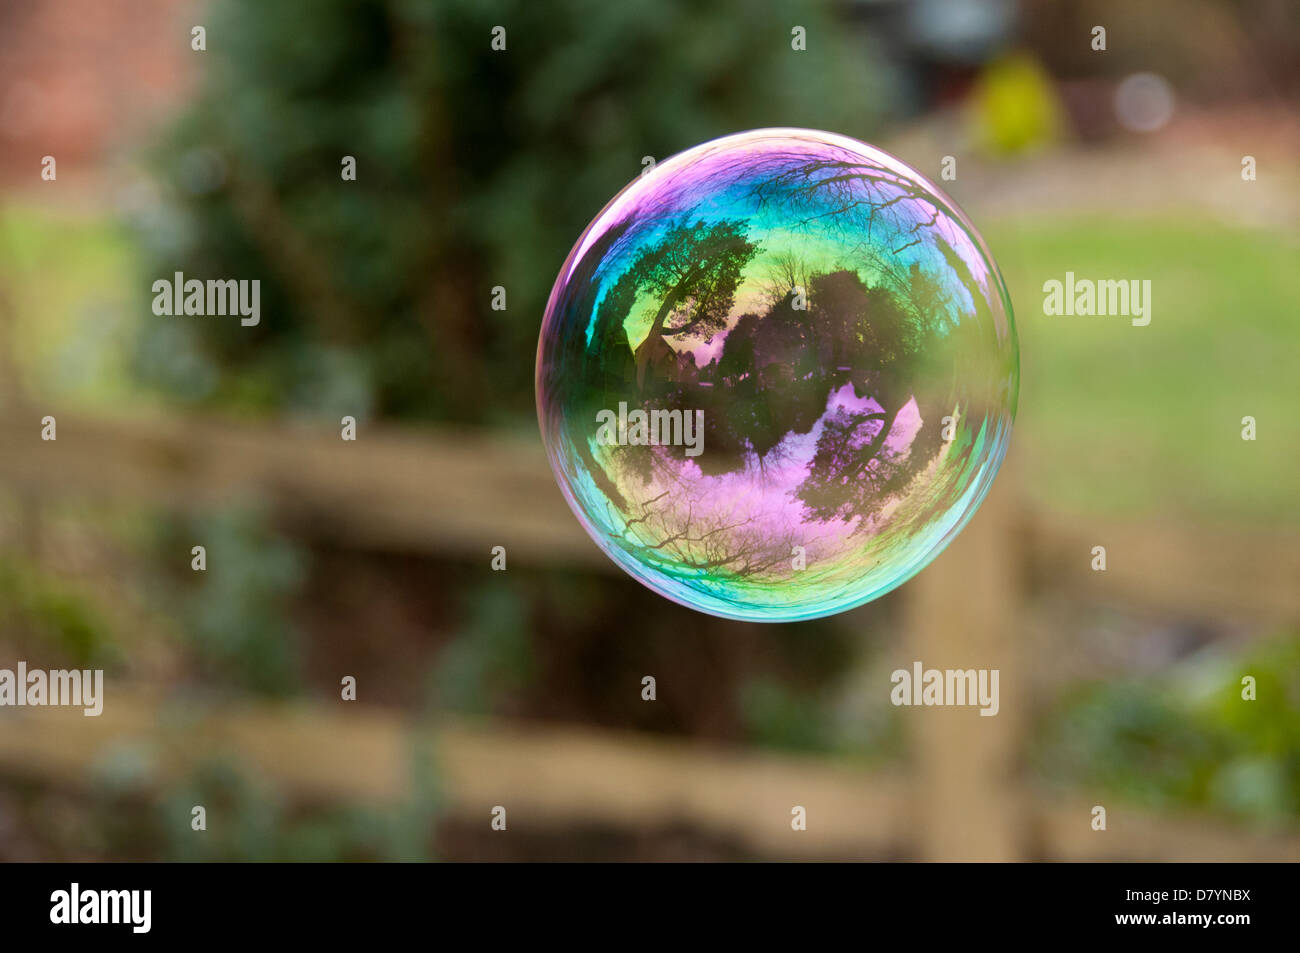 Close-up of beautiful spherical soap bubble floating in air with trees reflecting on its thin, colourful, iridescent surface - Yorkshire, England, UK. Stock Photo